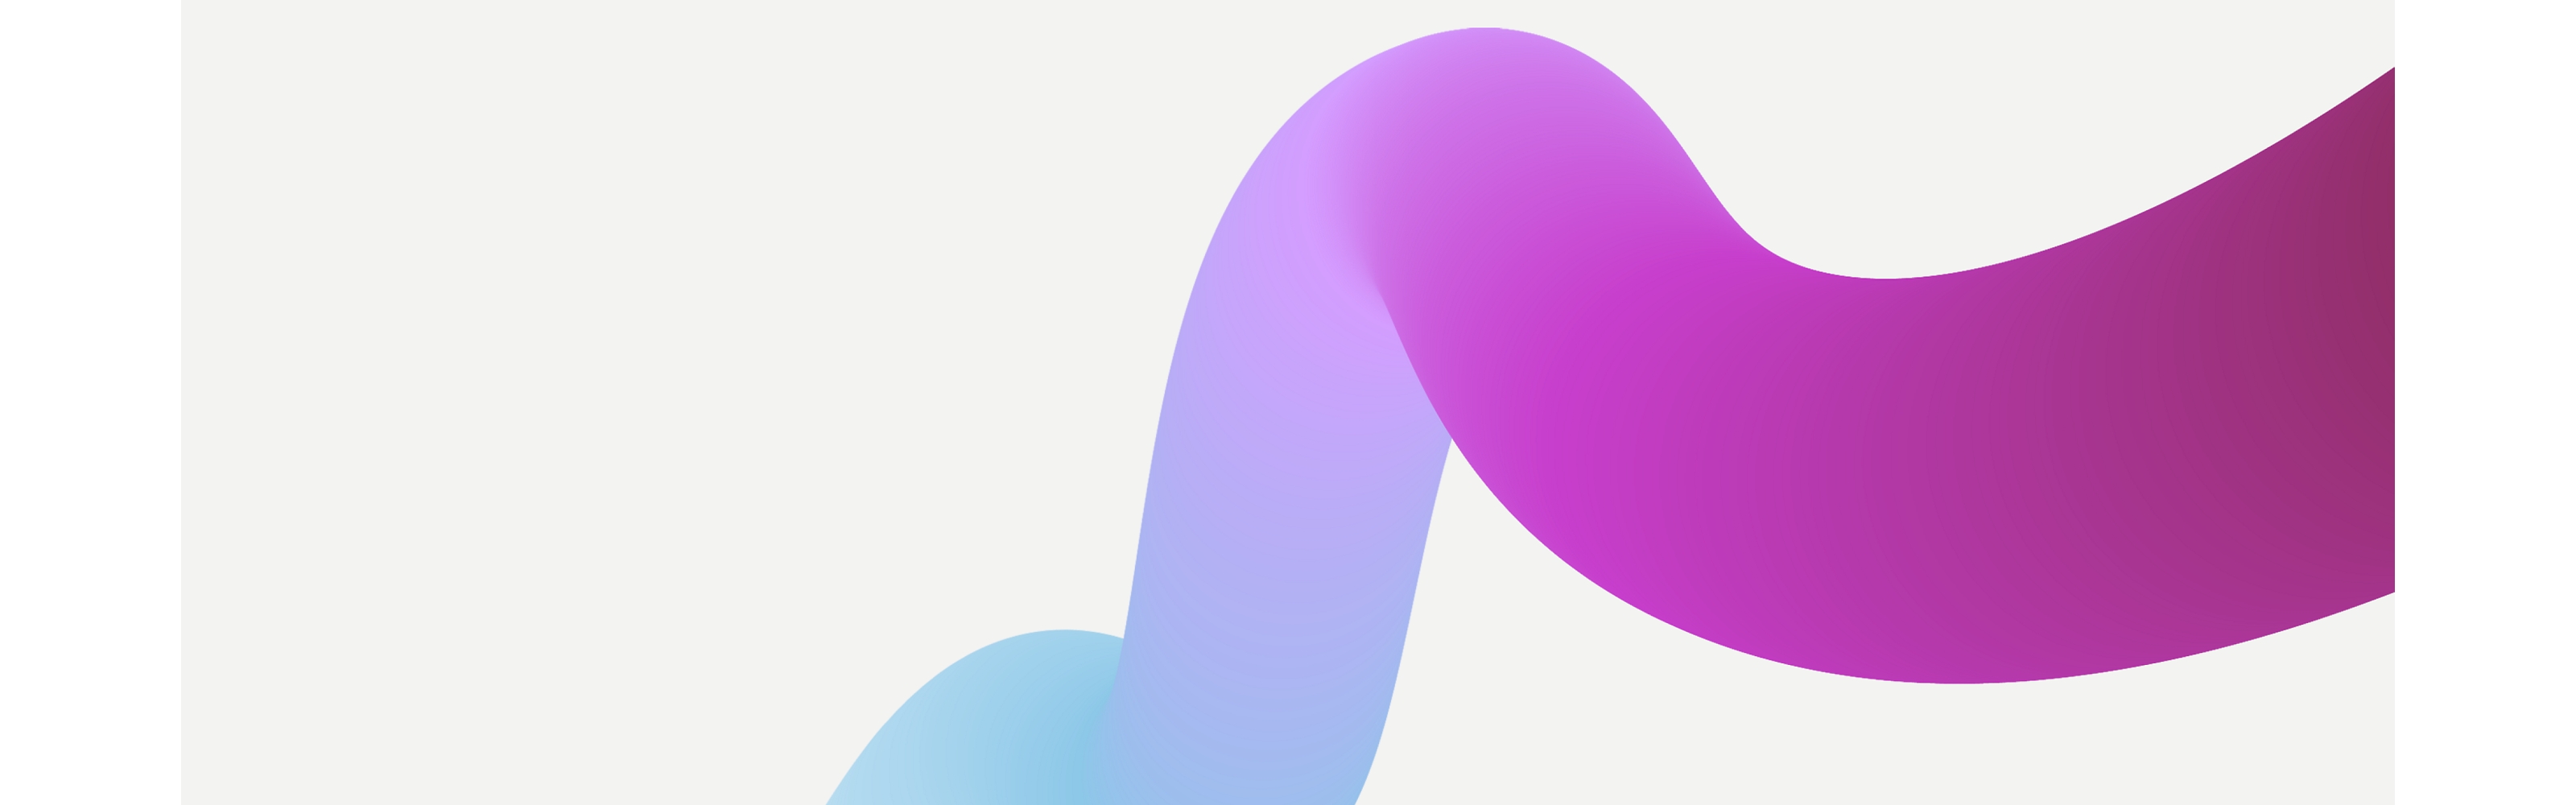 Abstract graphic of a flowing ribbon with a gradient from blue to purple on a white background.